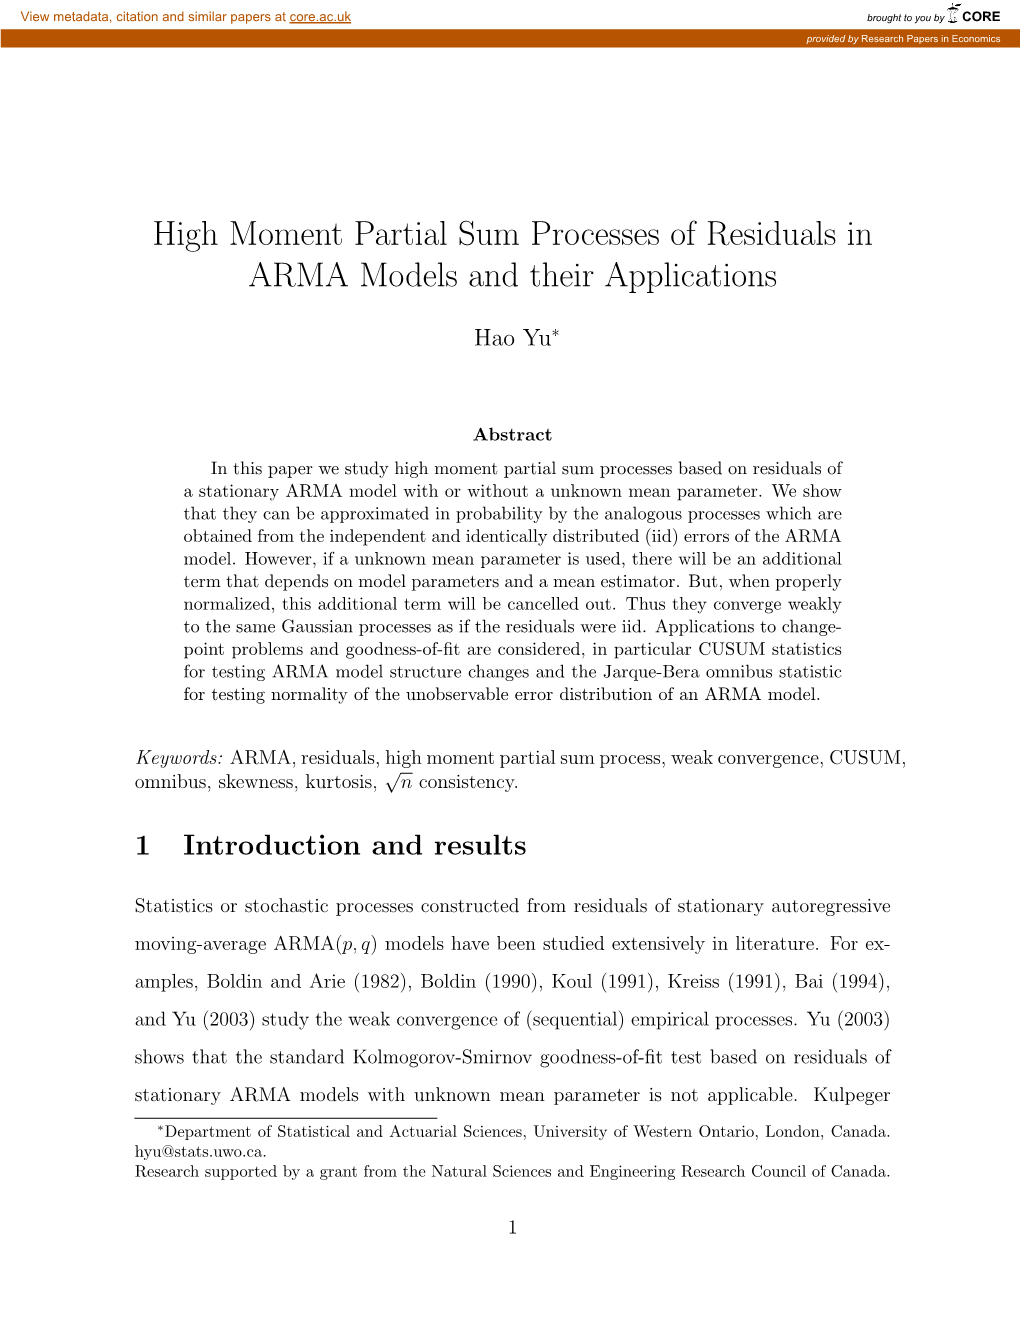 High Moment Partial Sum Processes of Residuals in ARMA Models and Their Applications